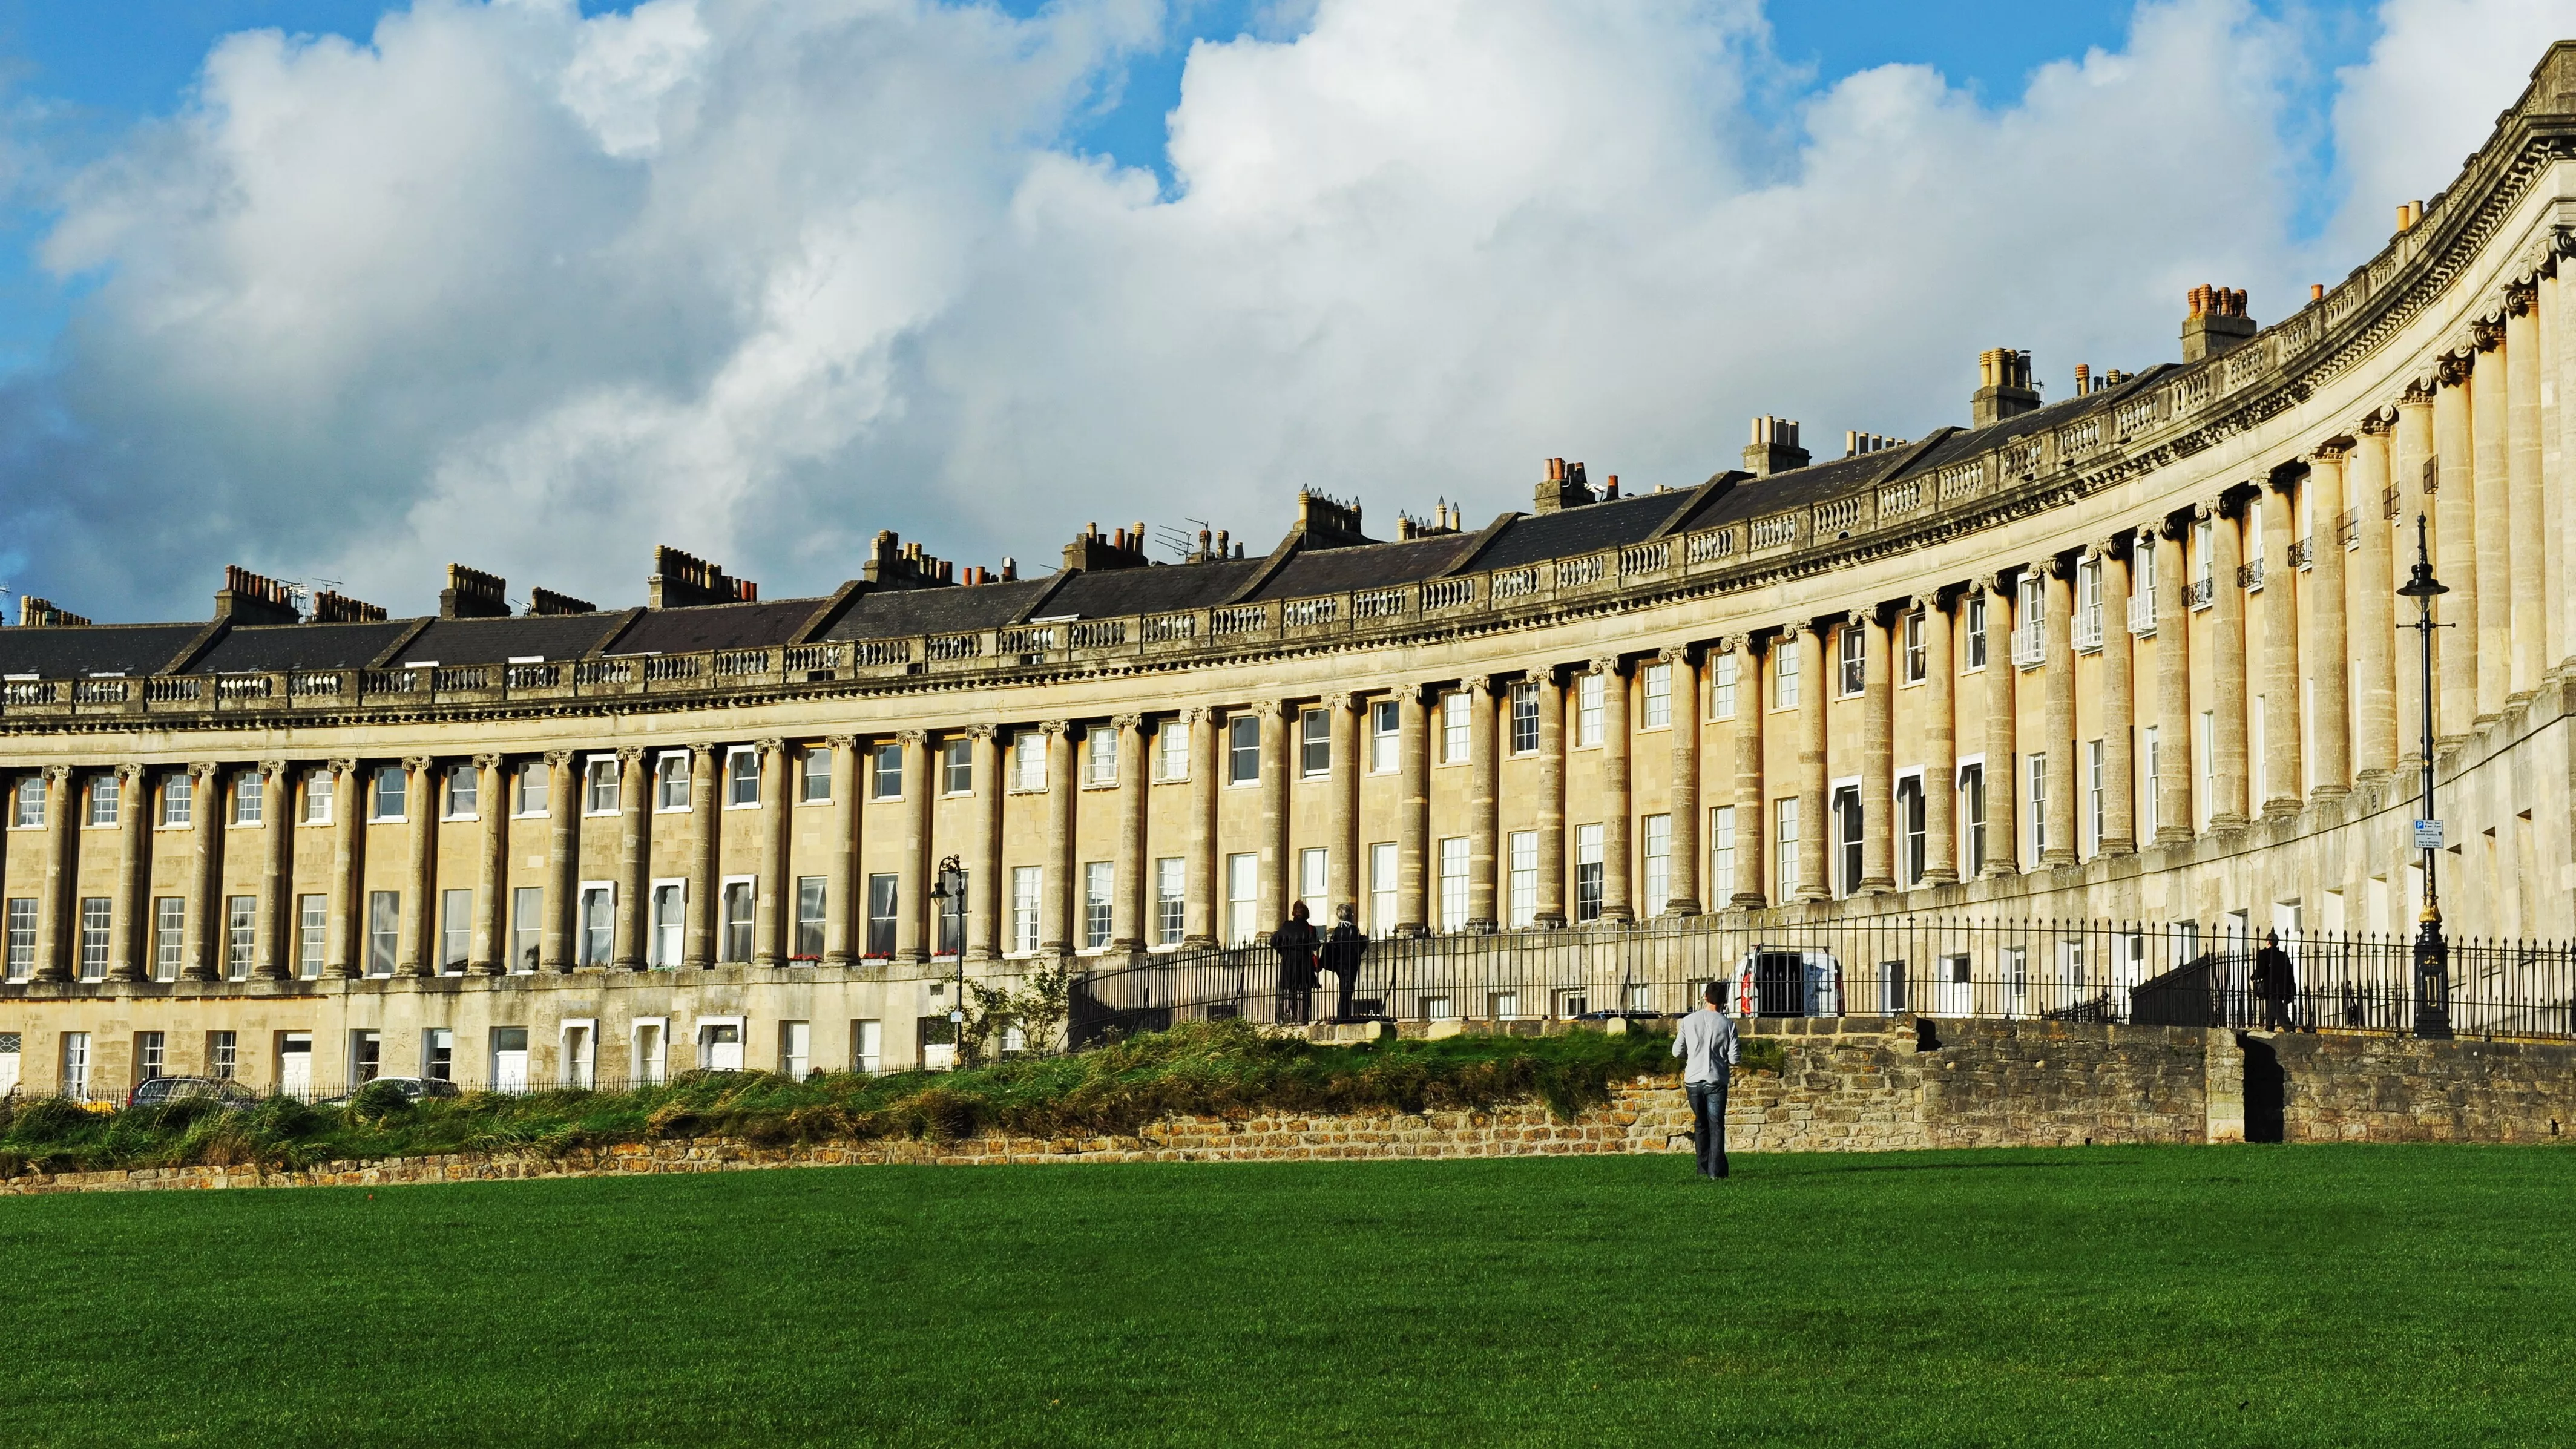 Royal Crescent in United Kingdom, Europe | Architecture - Rated 3.7